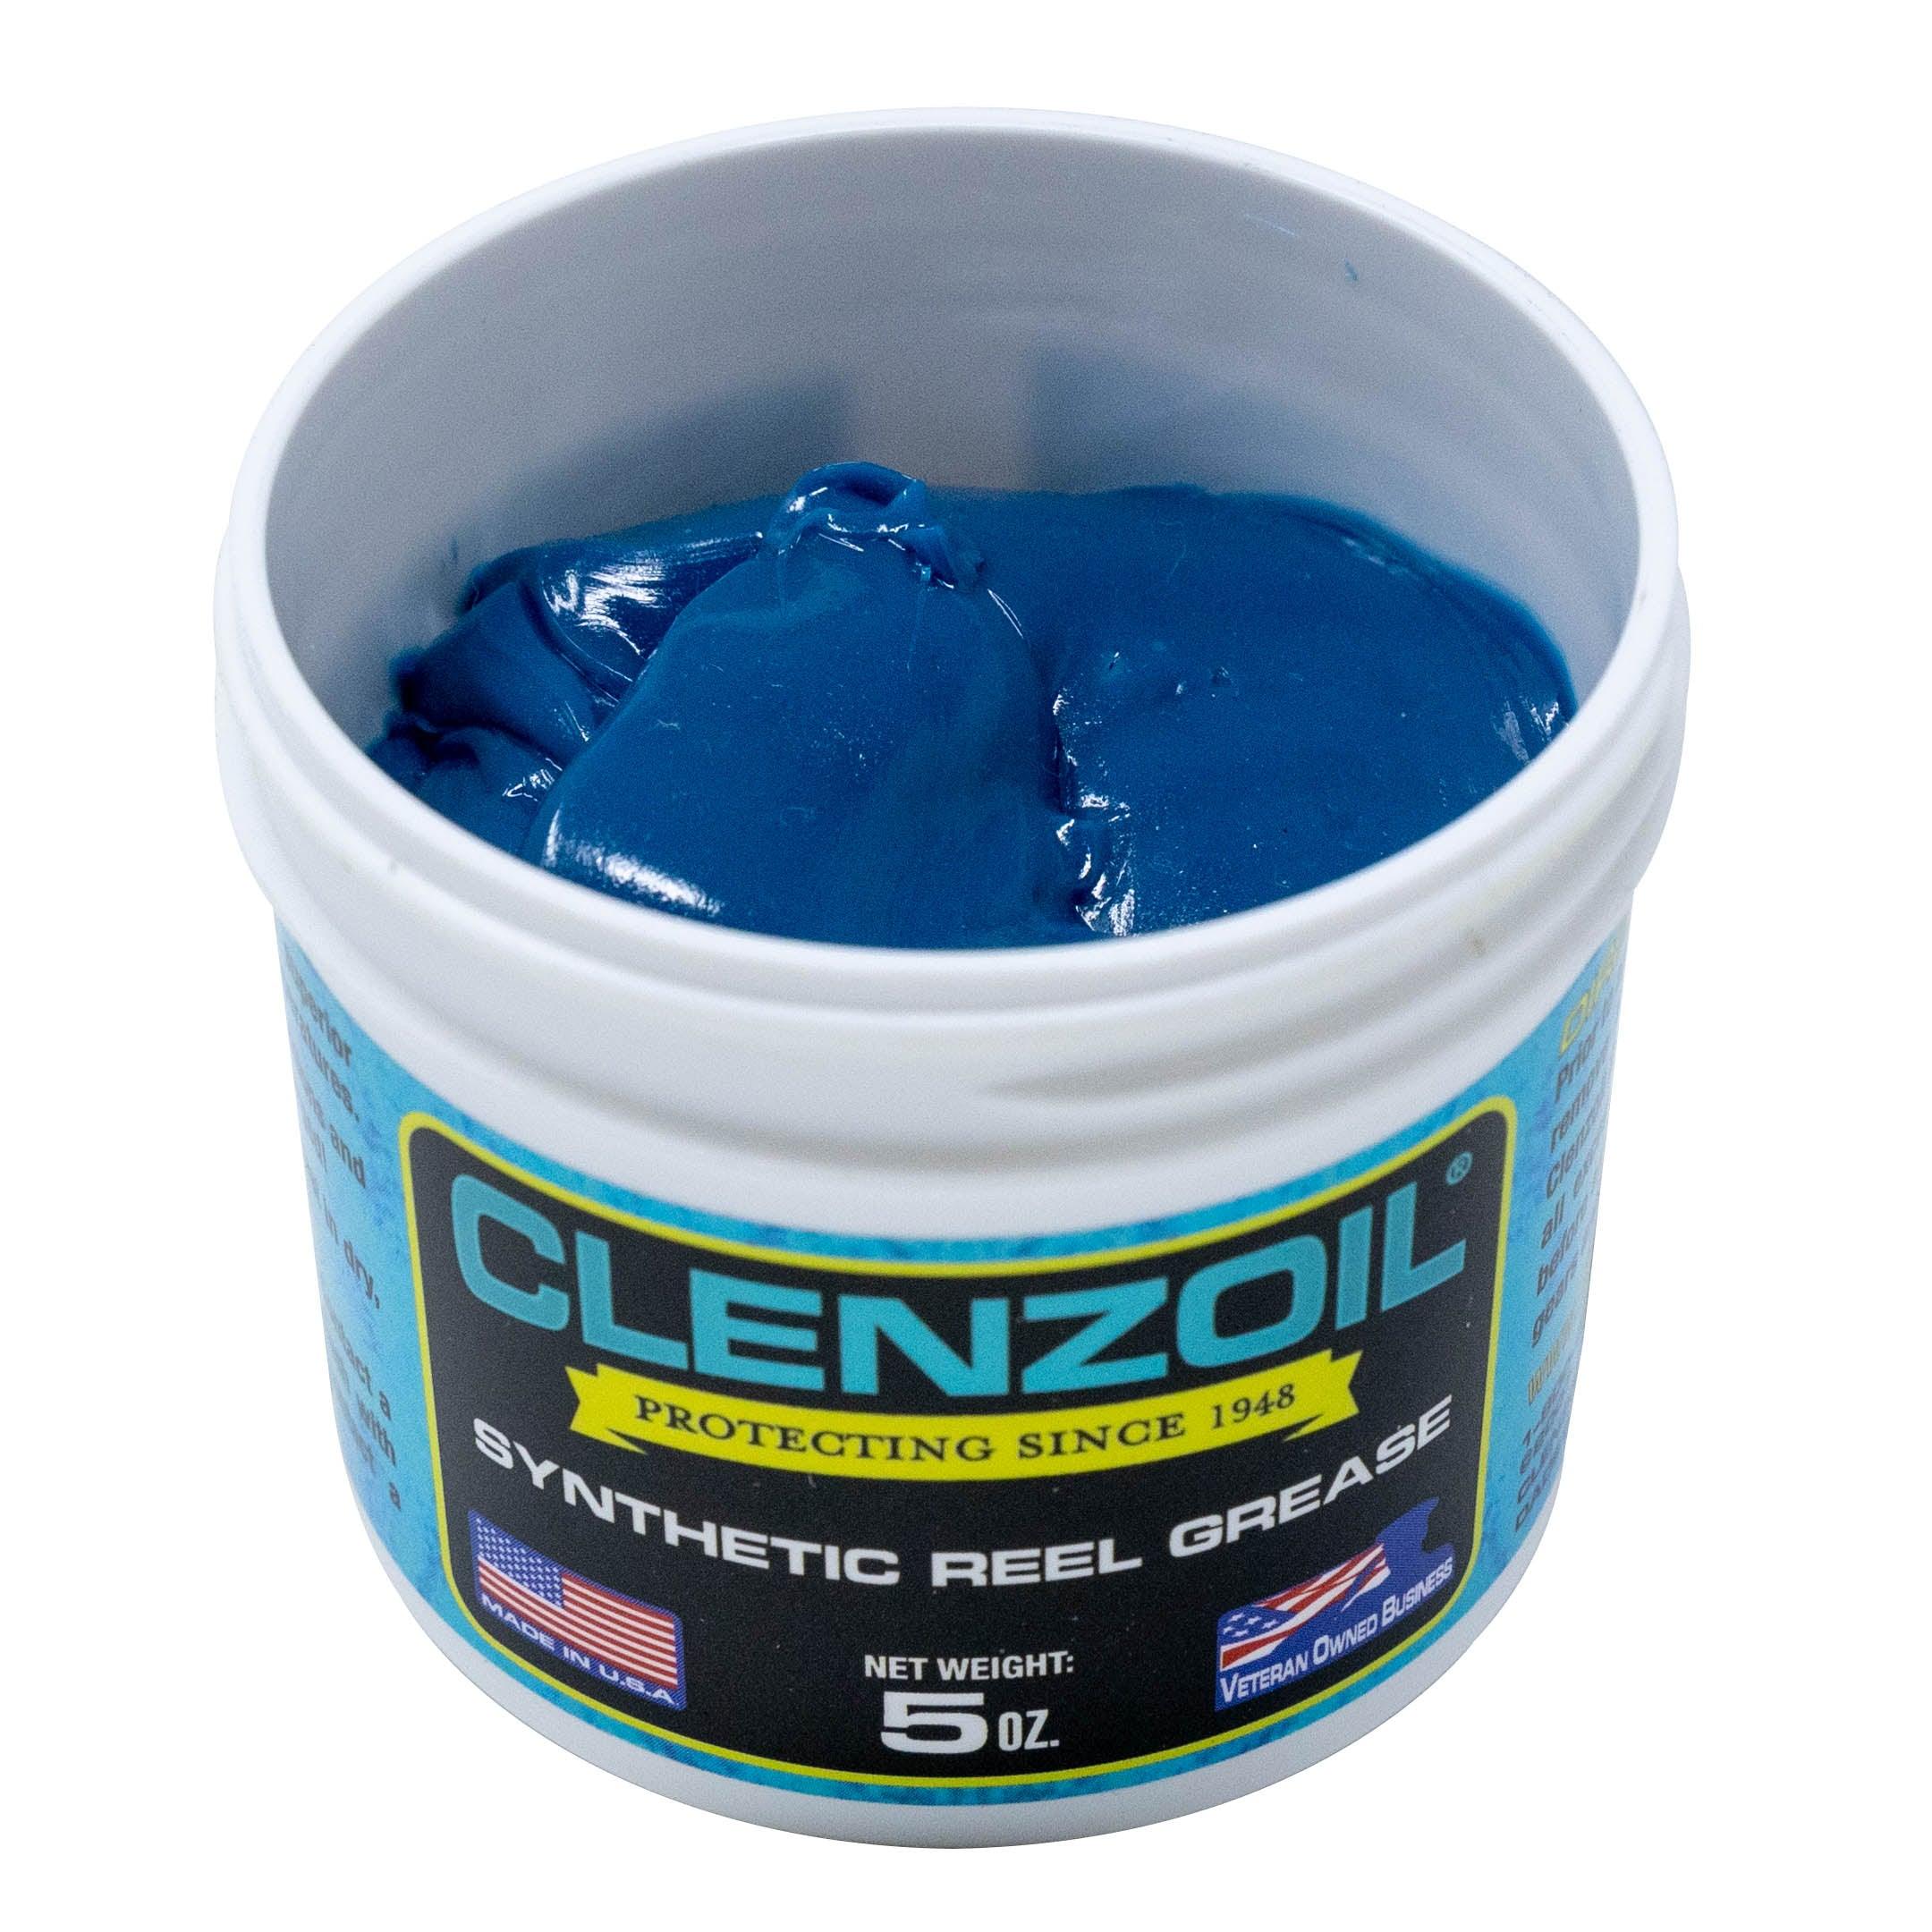 Synthetic Reel Grease - 5 oz. Jar - Clenzoil Unlimited